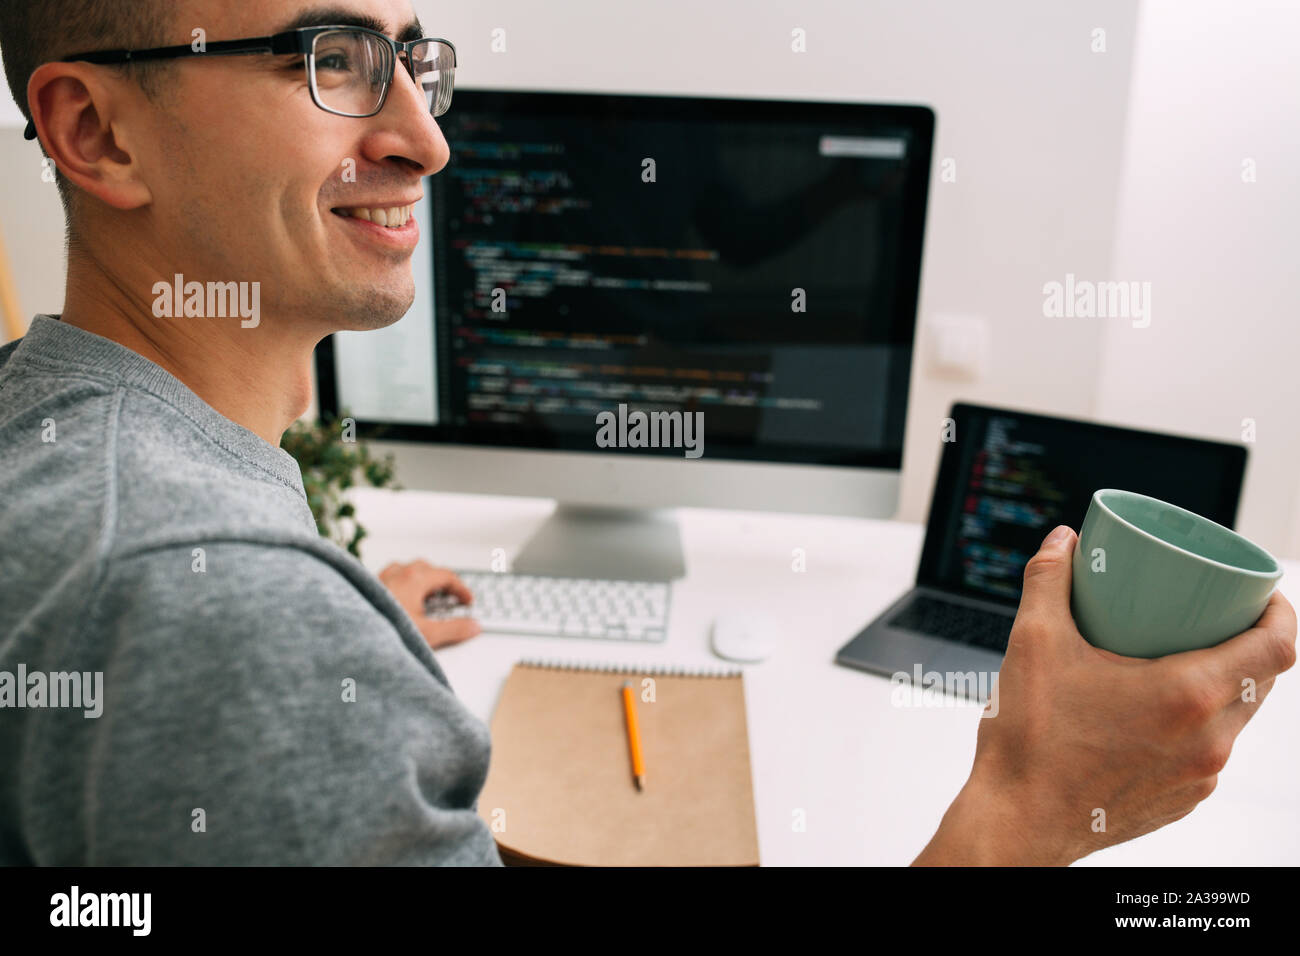 Programmer, working behind the desk, with two screens filled with code lines Stock Photo